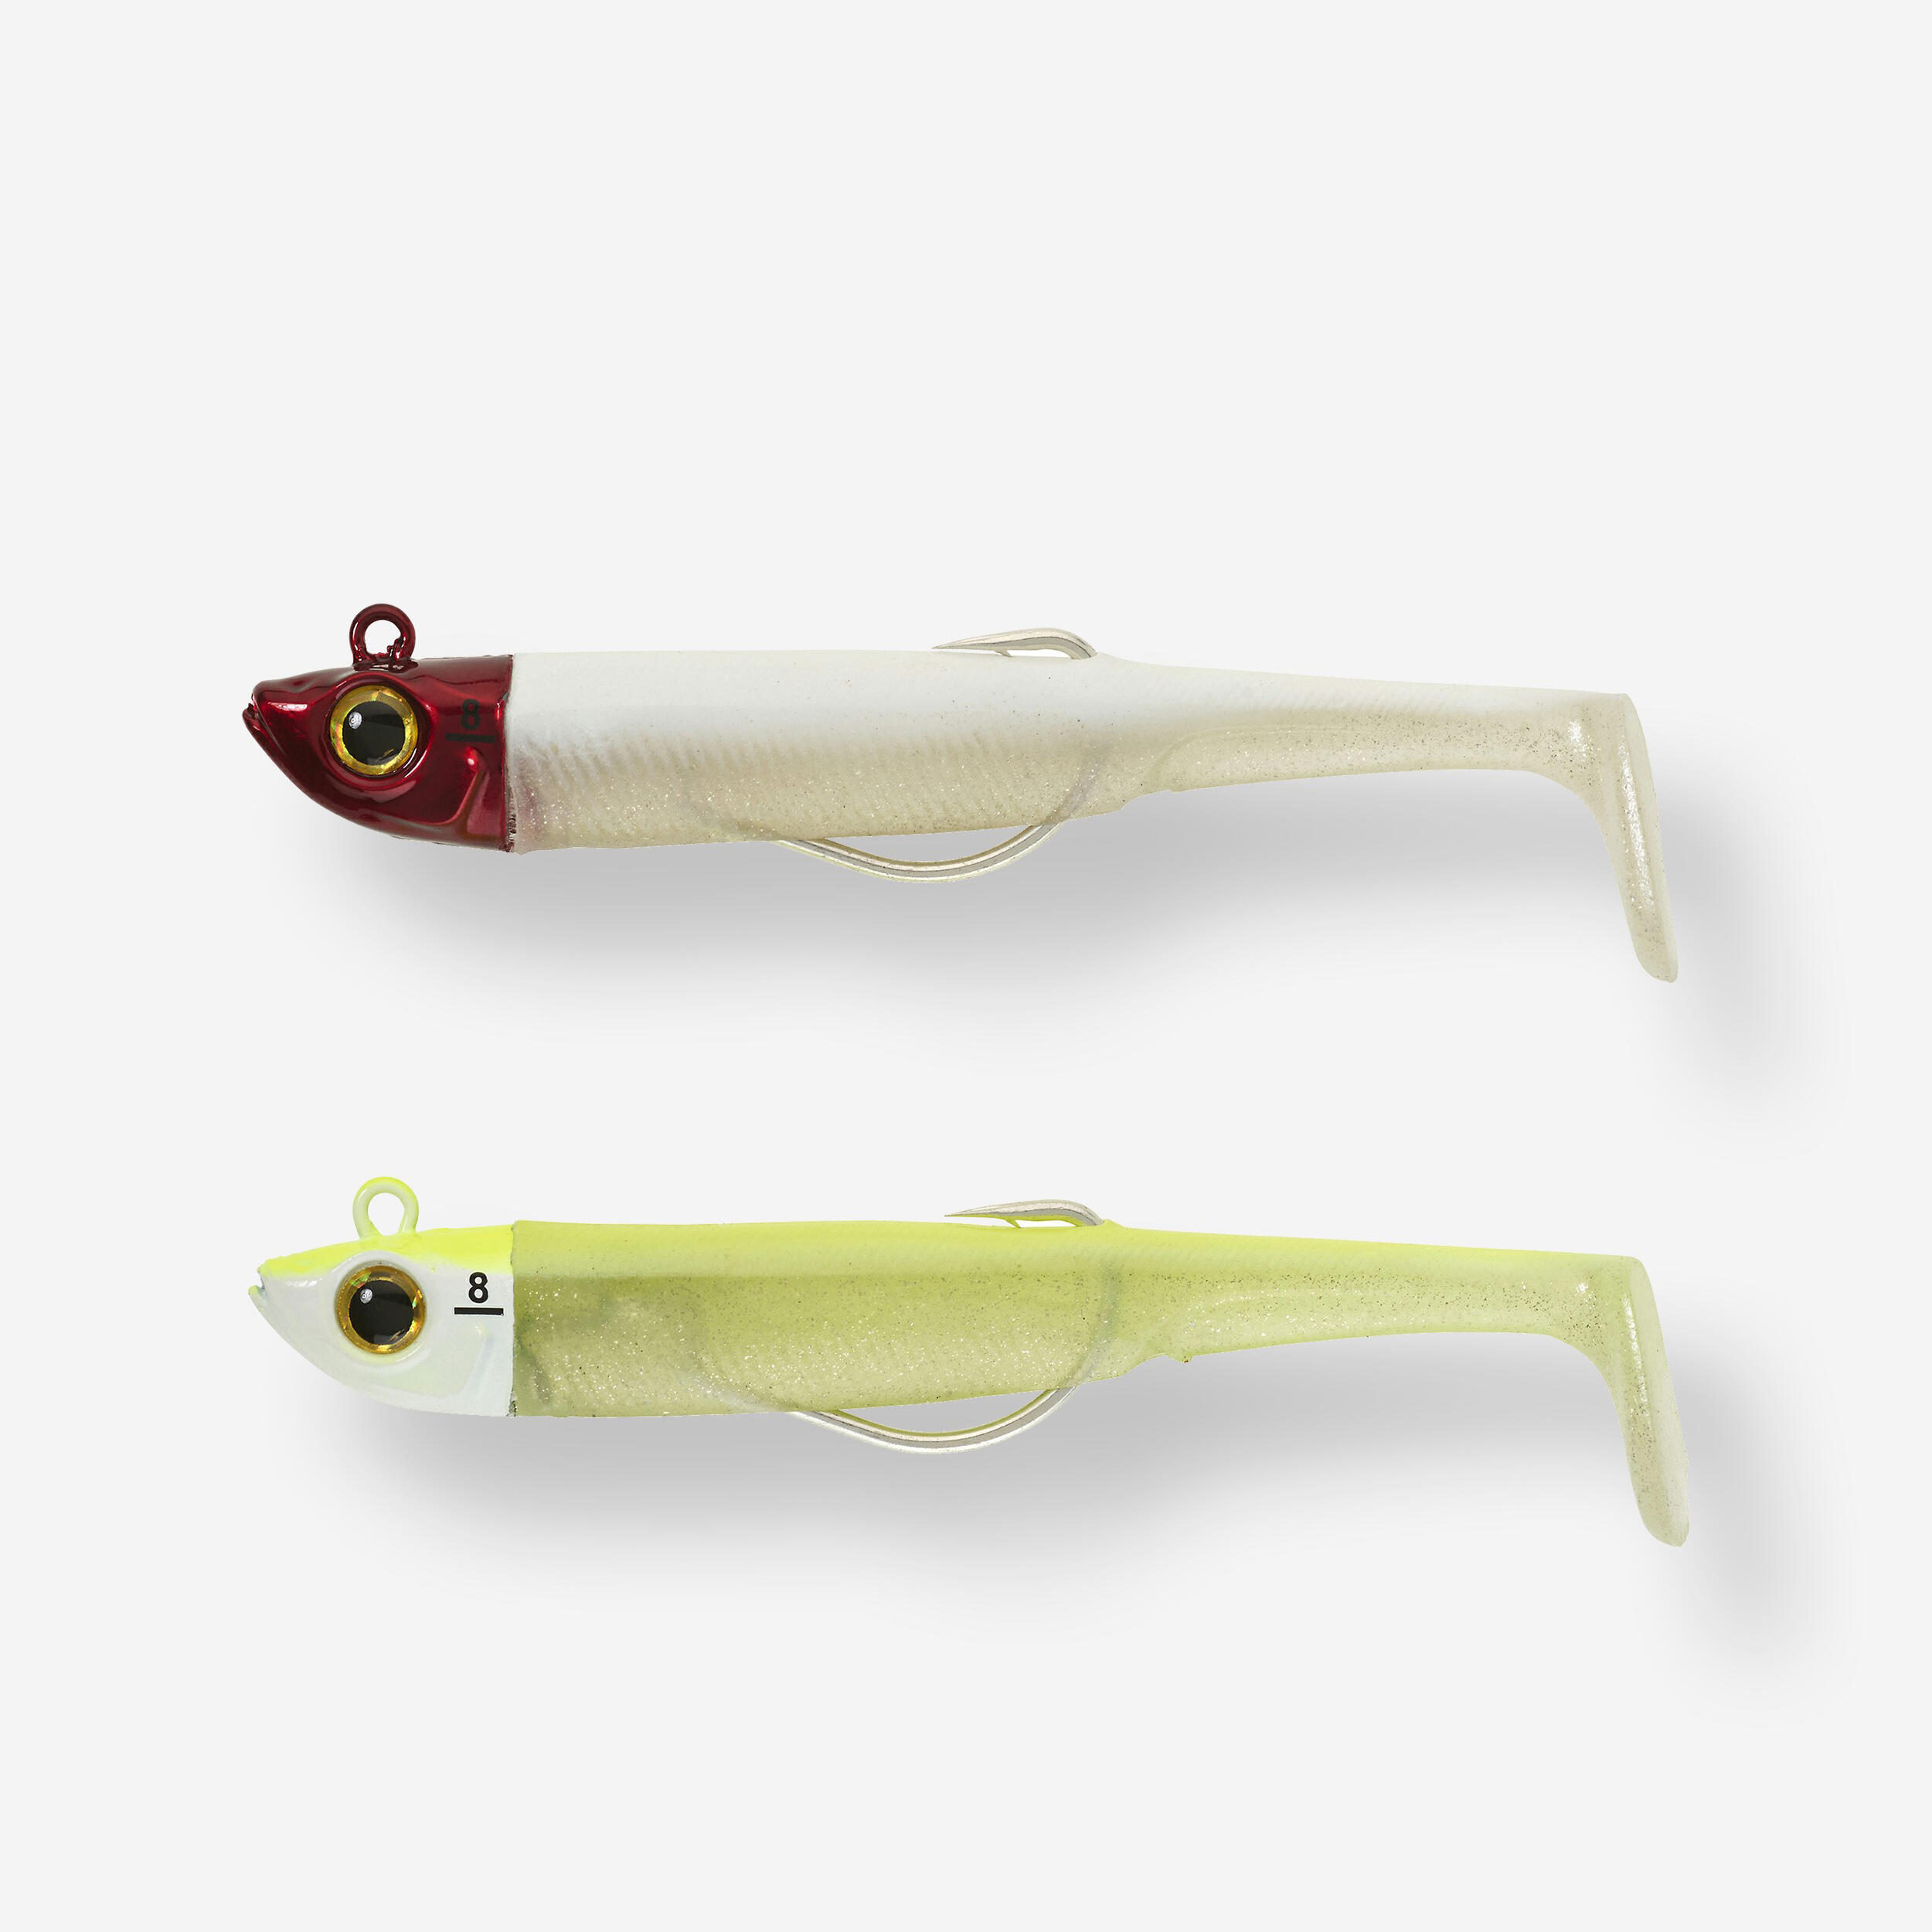 90 Ancho Saltwater Fishing - Texas Rig Soft Lure 8 g - Fluo yellow, Red -  Caperlan - Decathlon